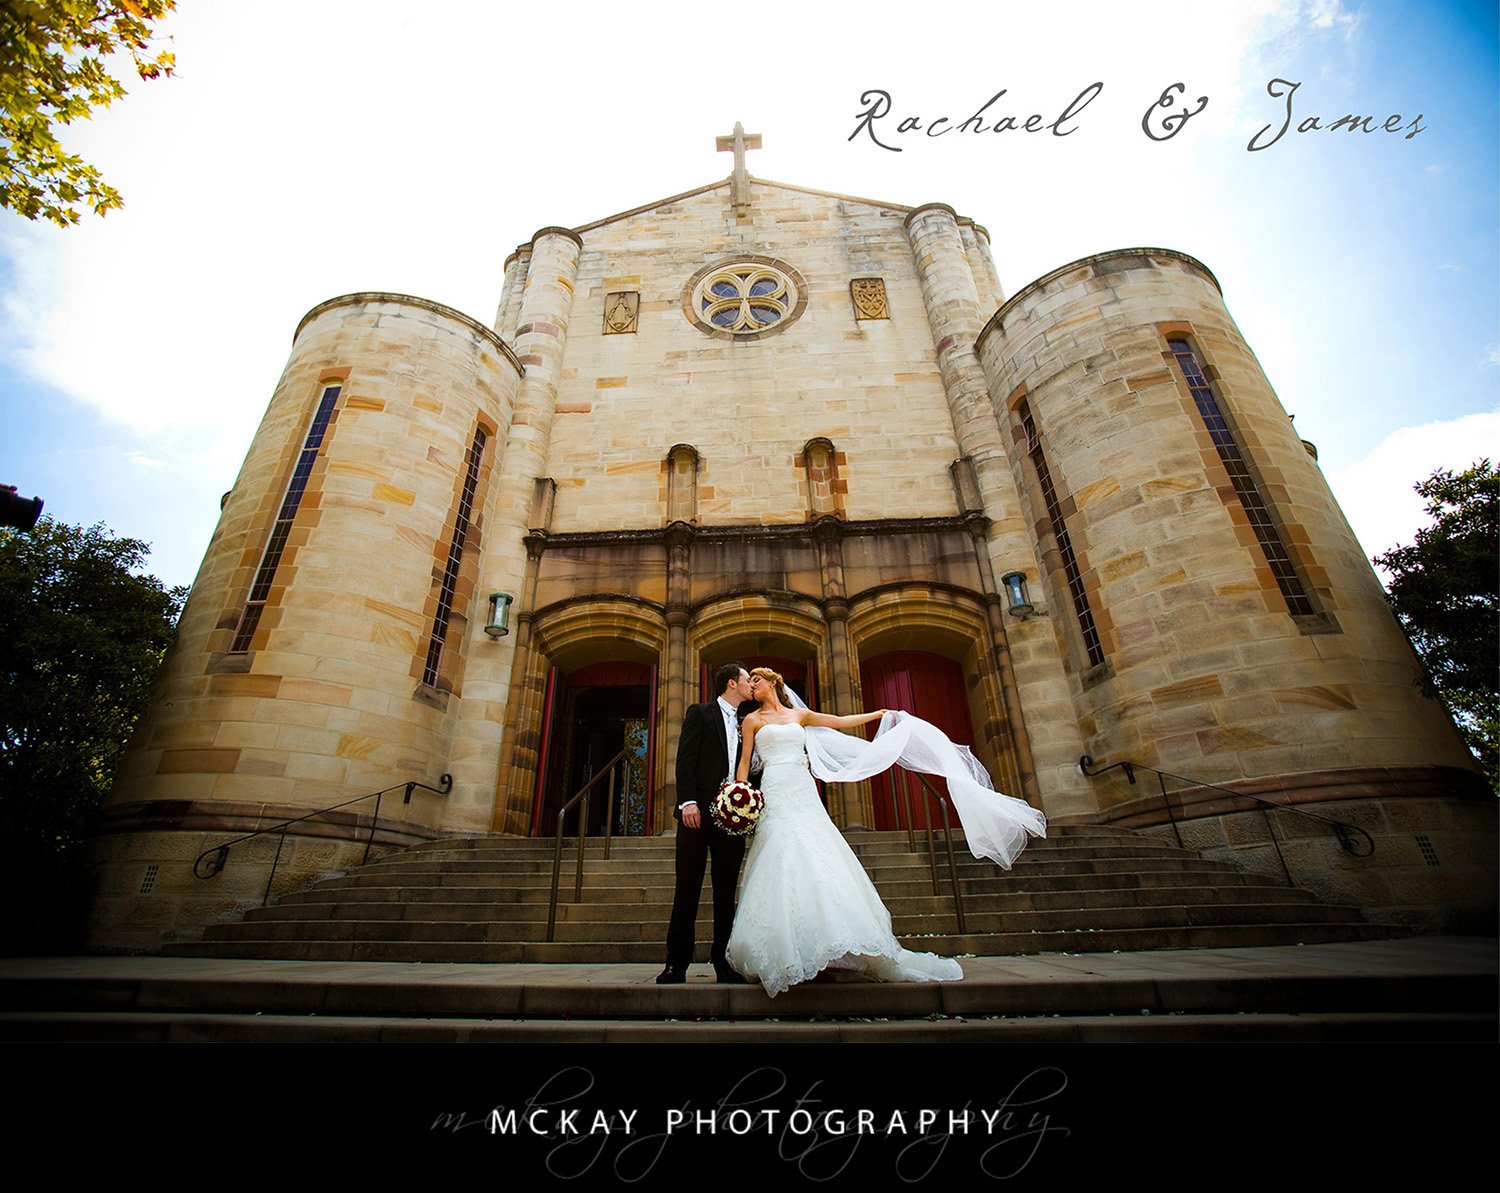 Rachael James wedding at St Mary's Church in North Sydney